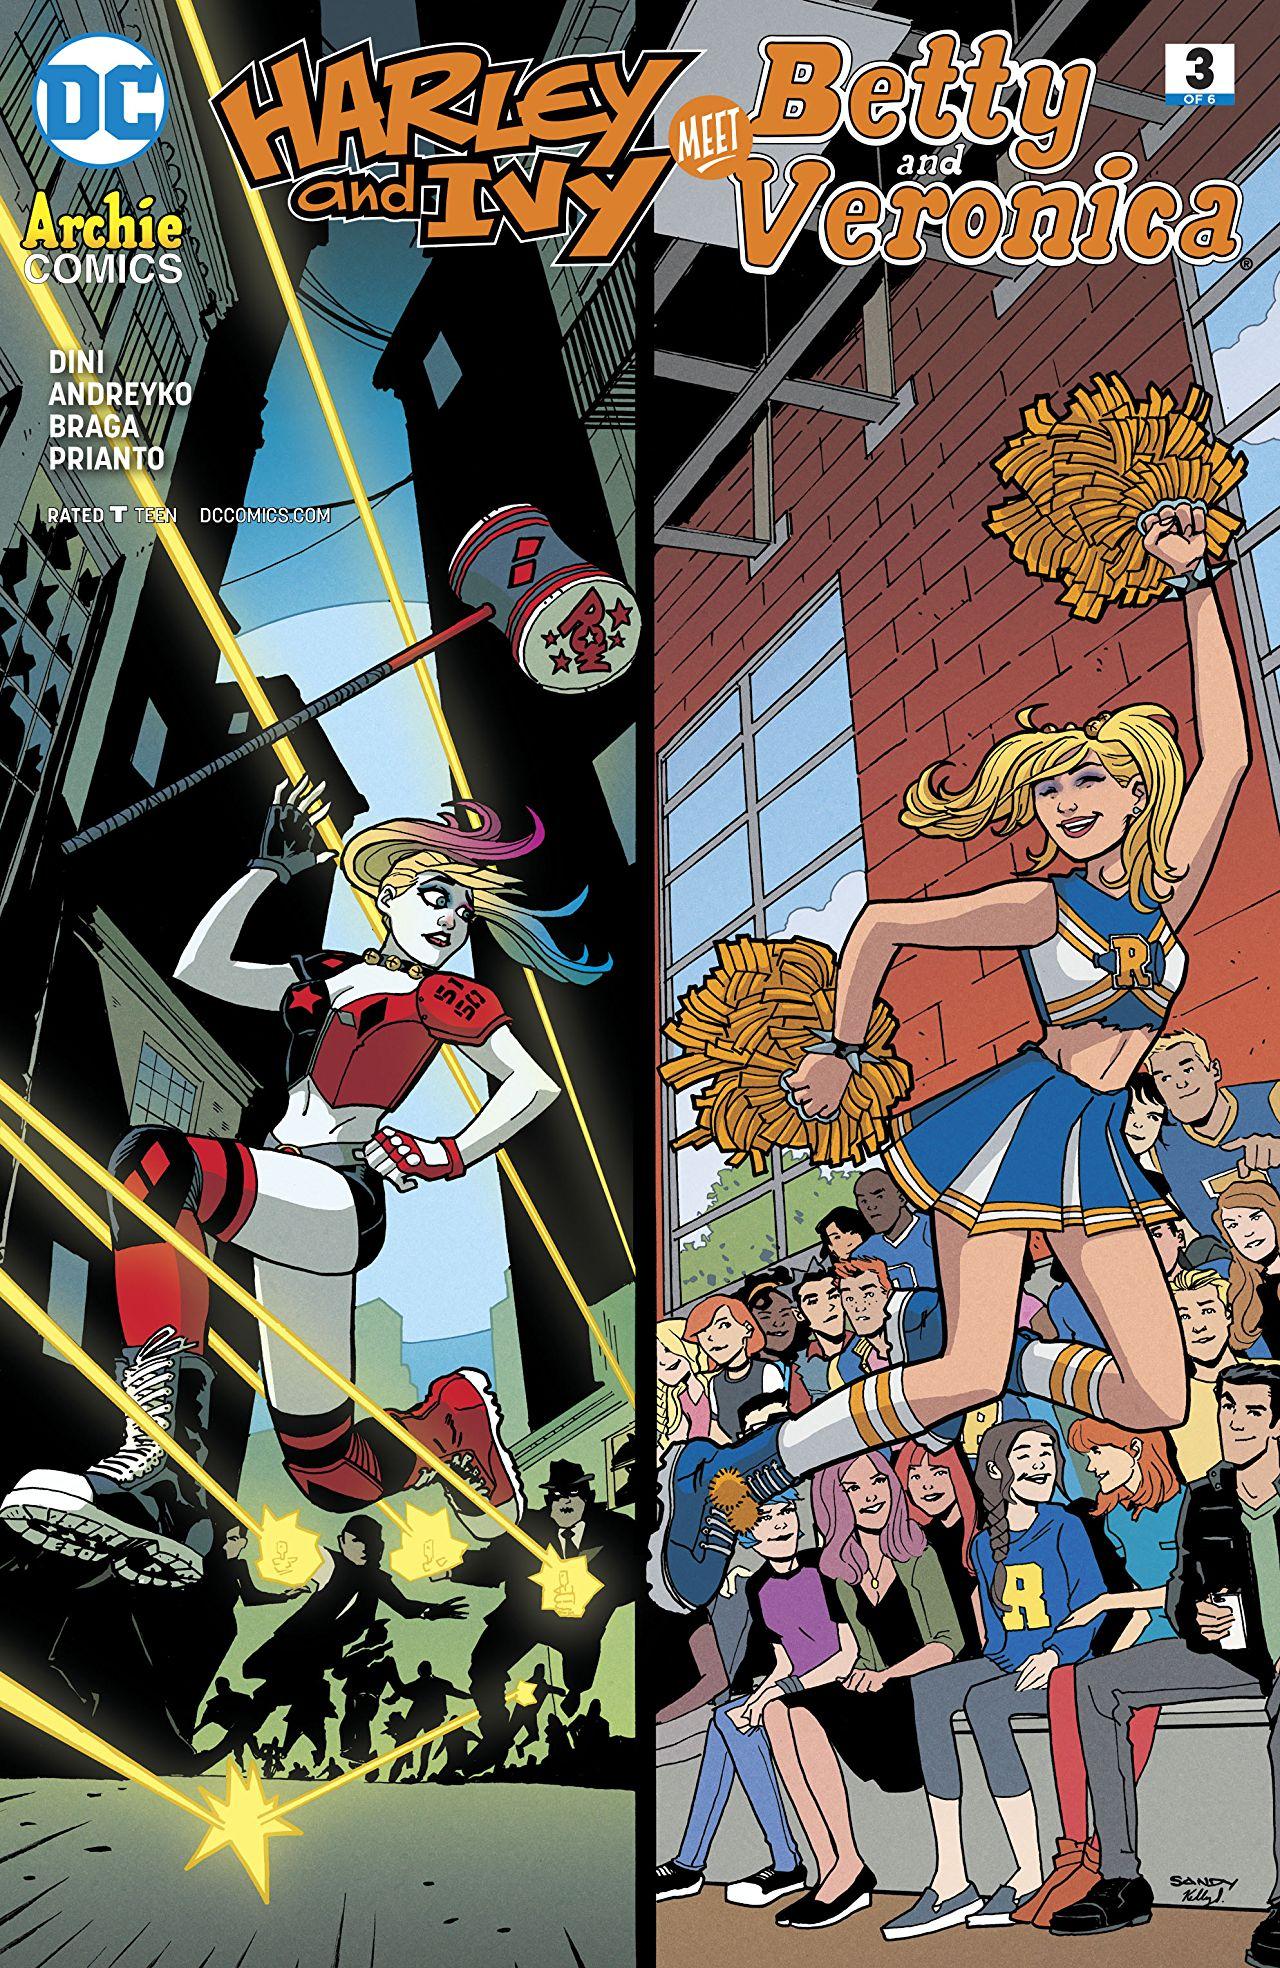 Harley and Ivy Meet Betty and Veronica Vol. 1 #3